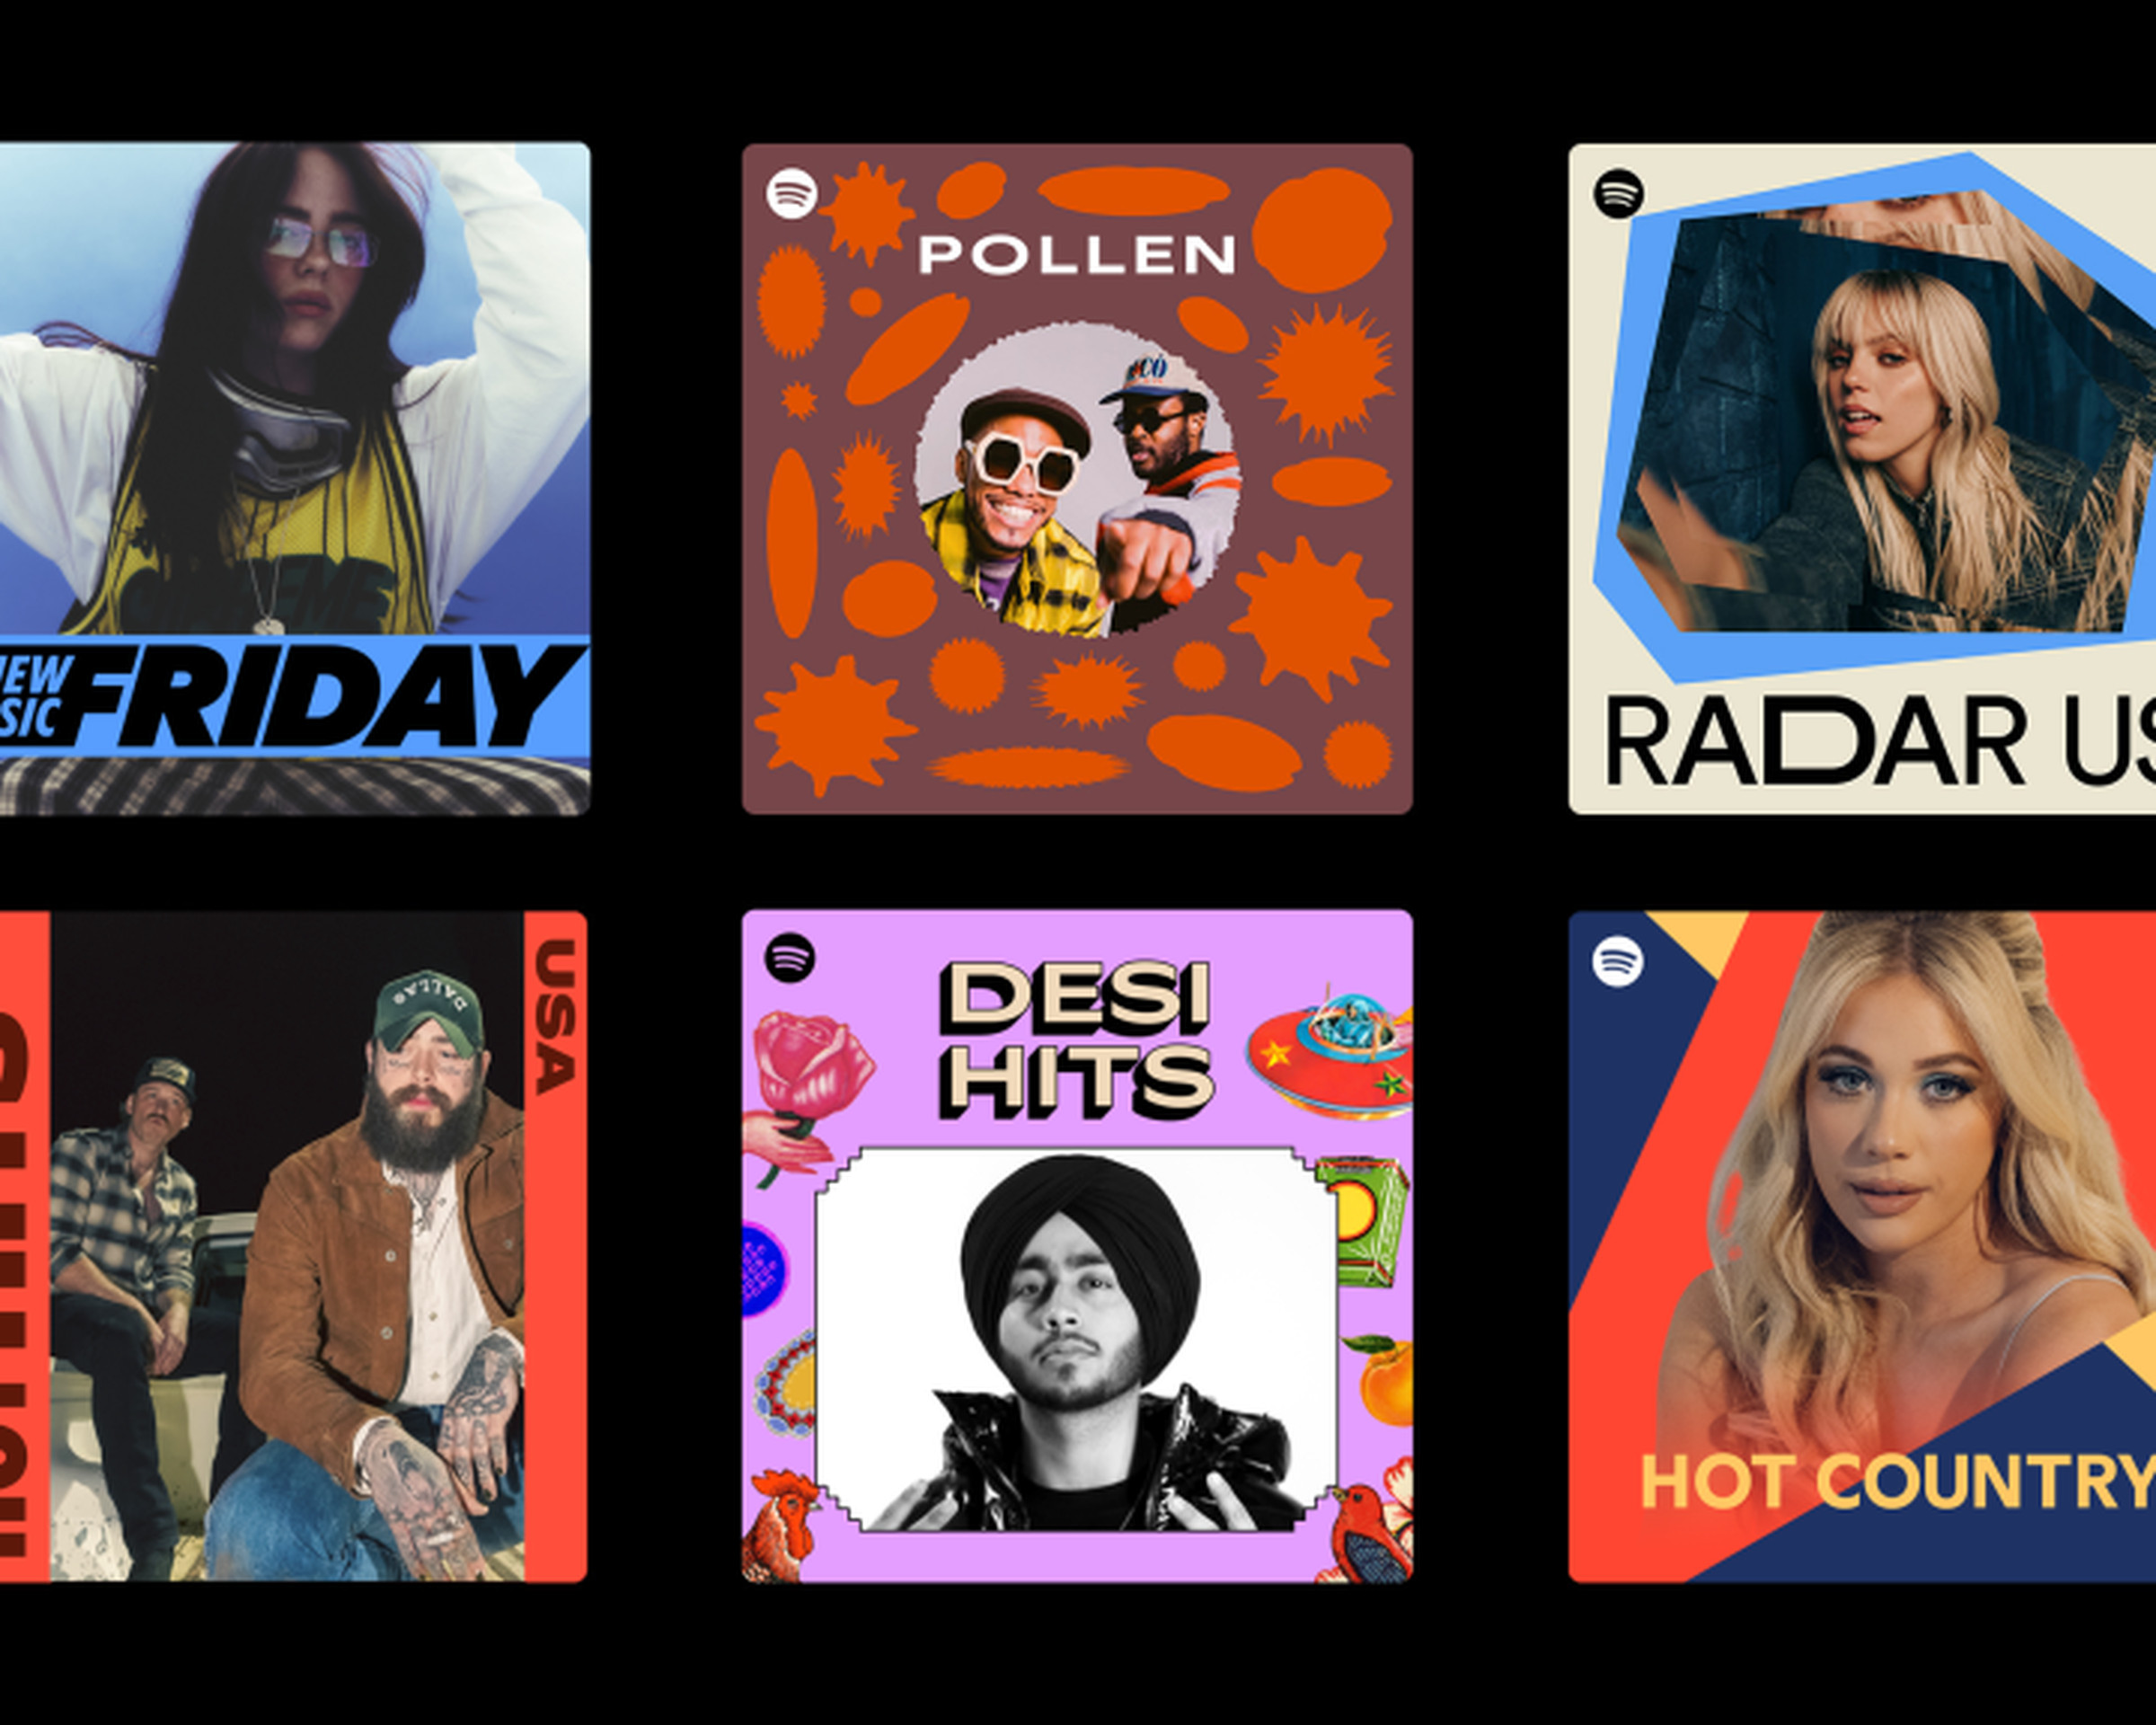 A promotion of Spotify’s new Spotify Mix typeface showing six different playlist covers.